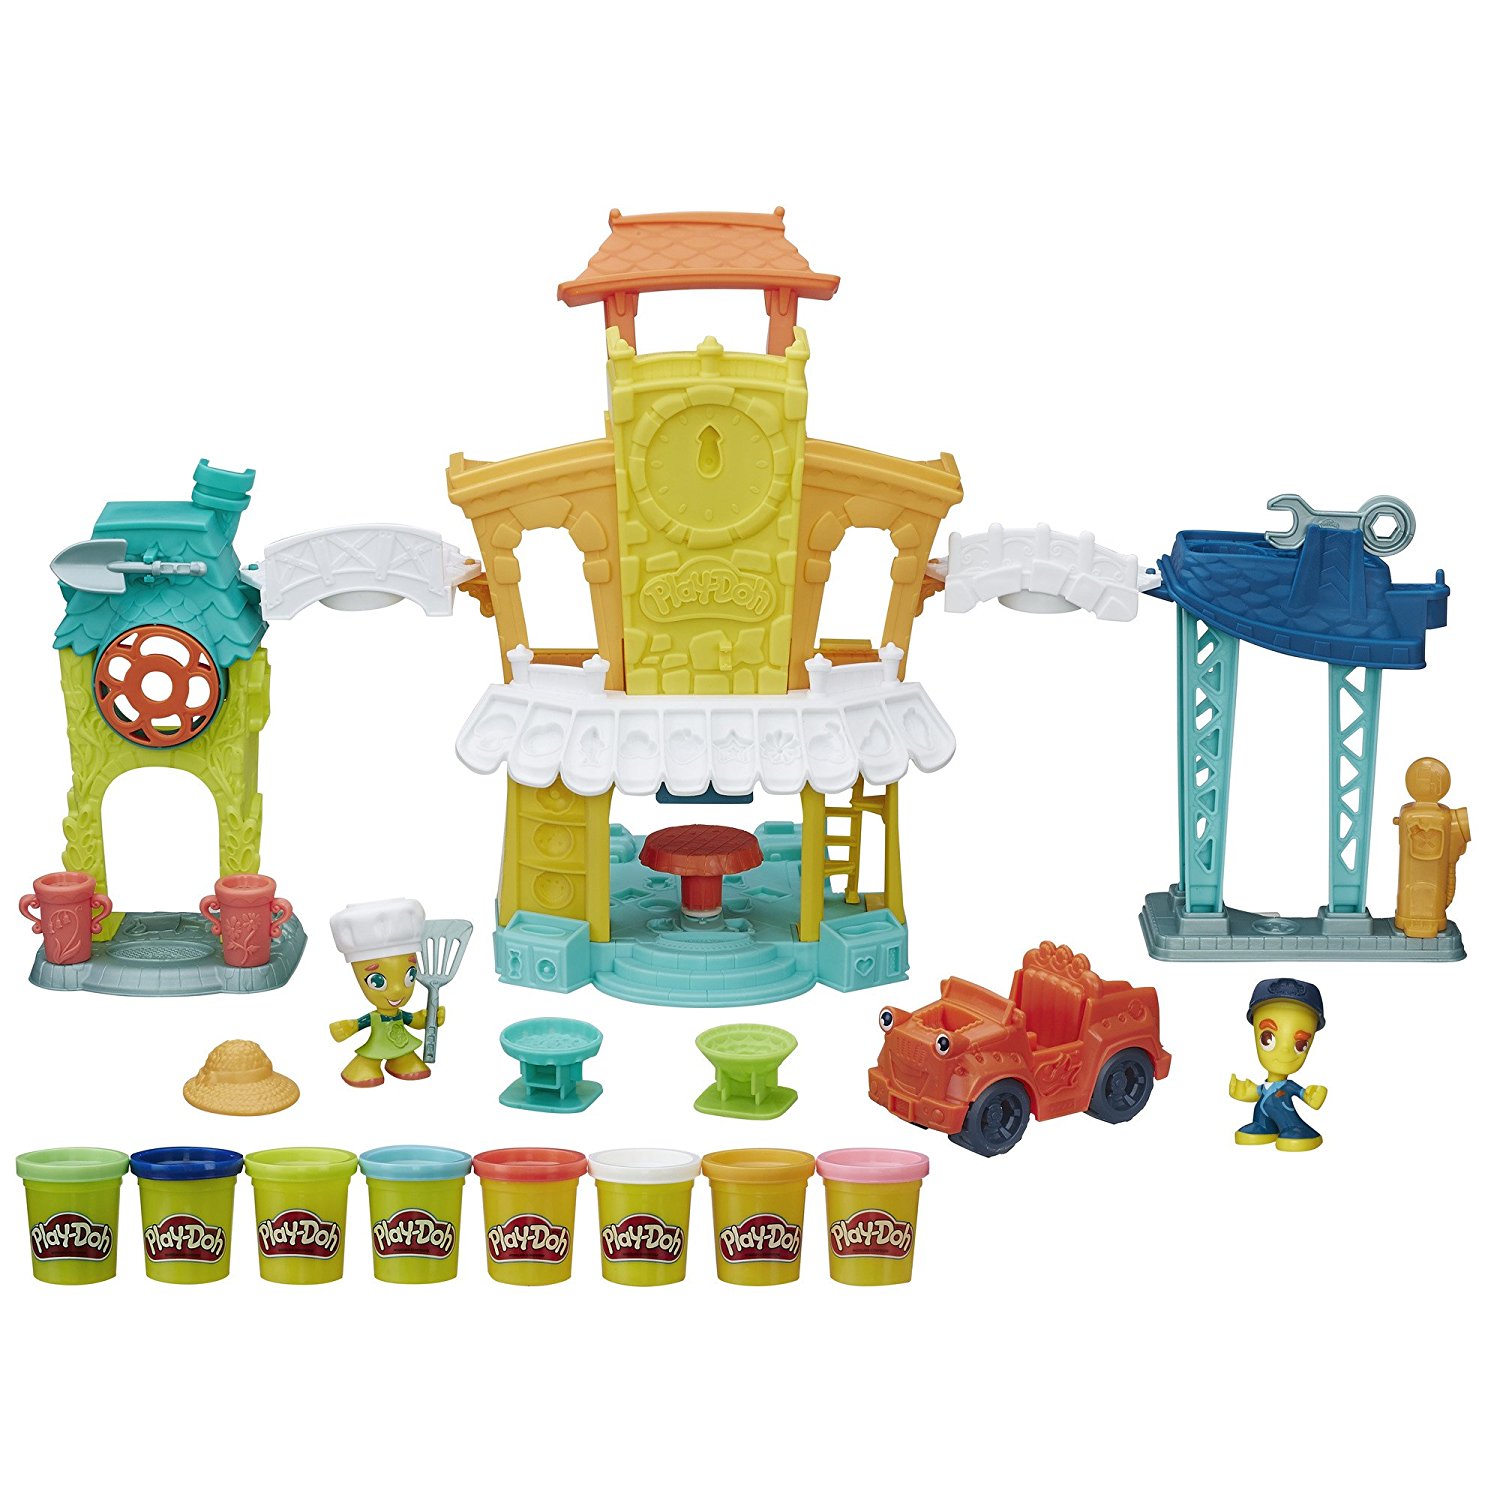 Play-Doh Town 3-in-1 Town Center – Just $10.00!